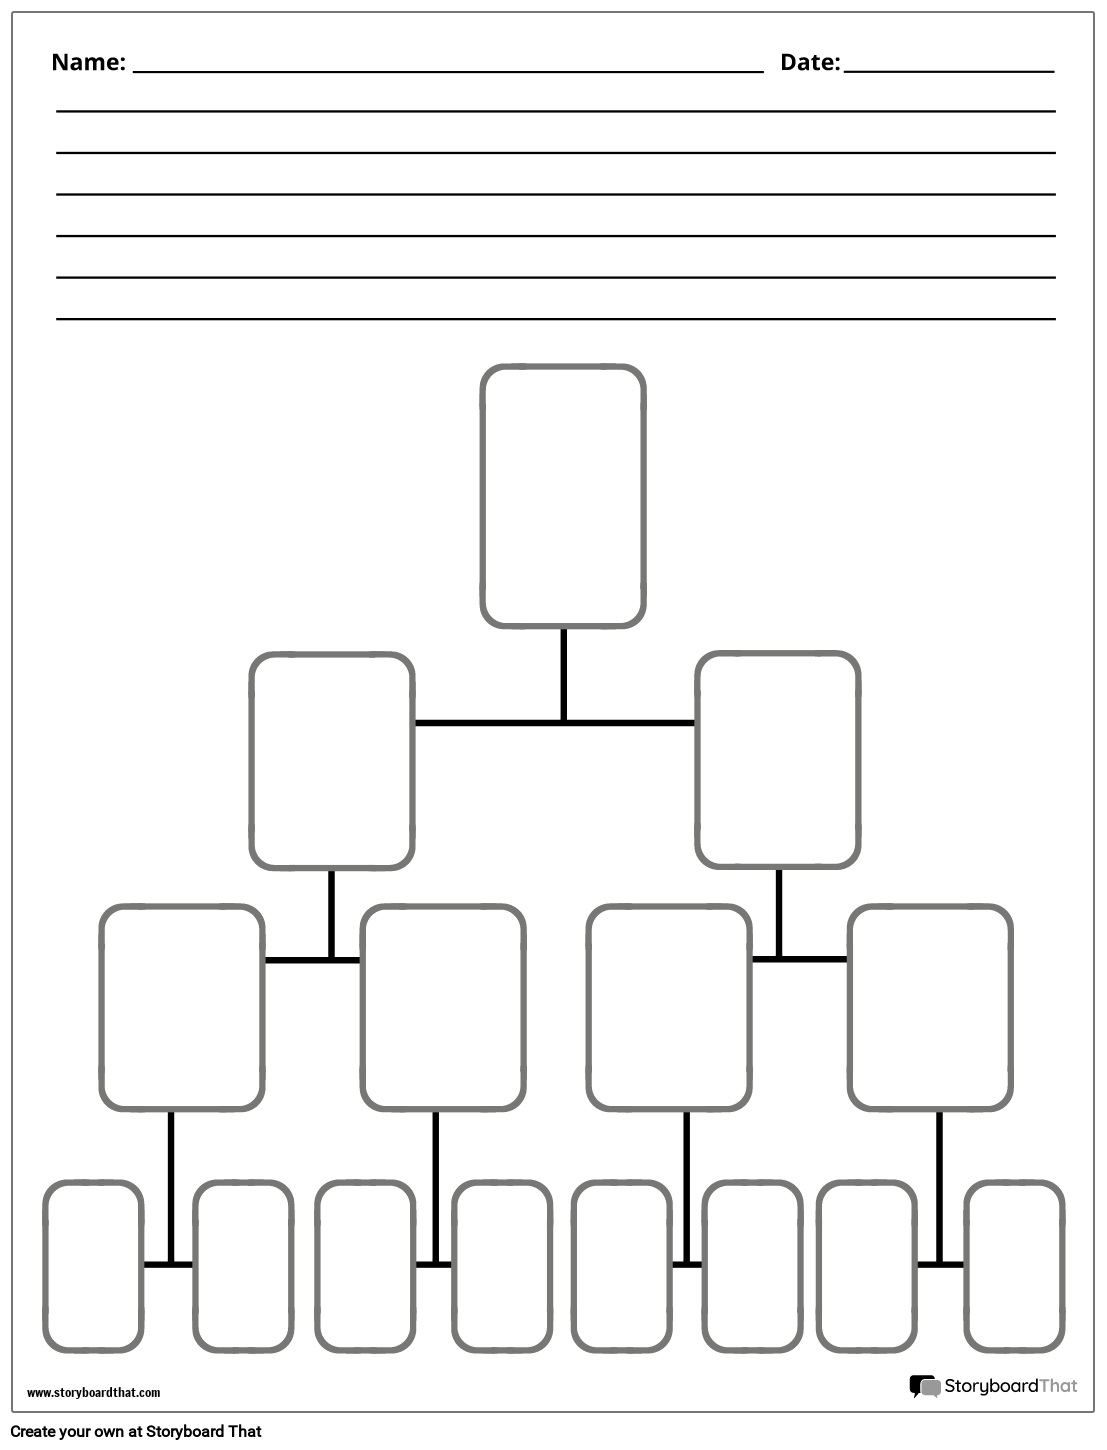 new-create-page-tree-diagram-template-4-black-white